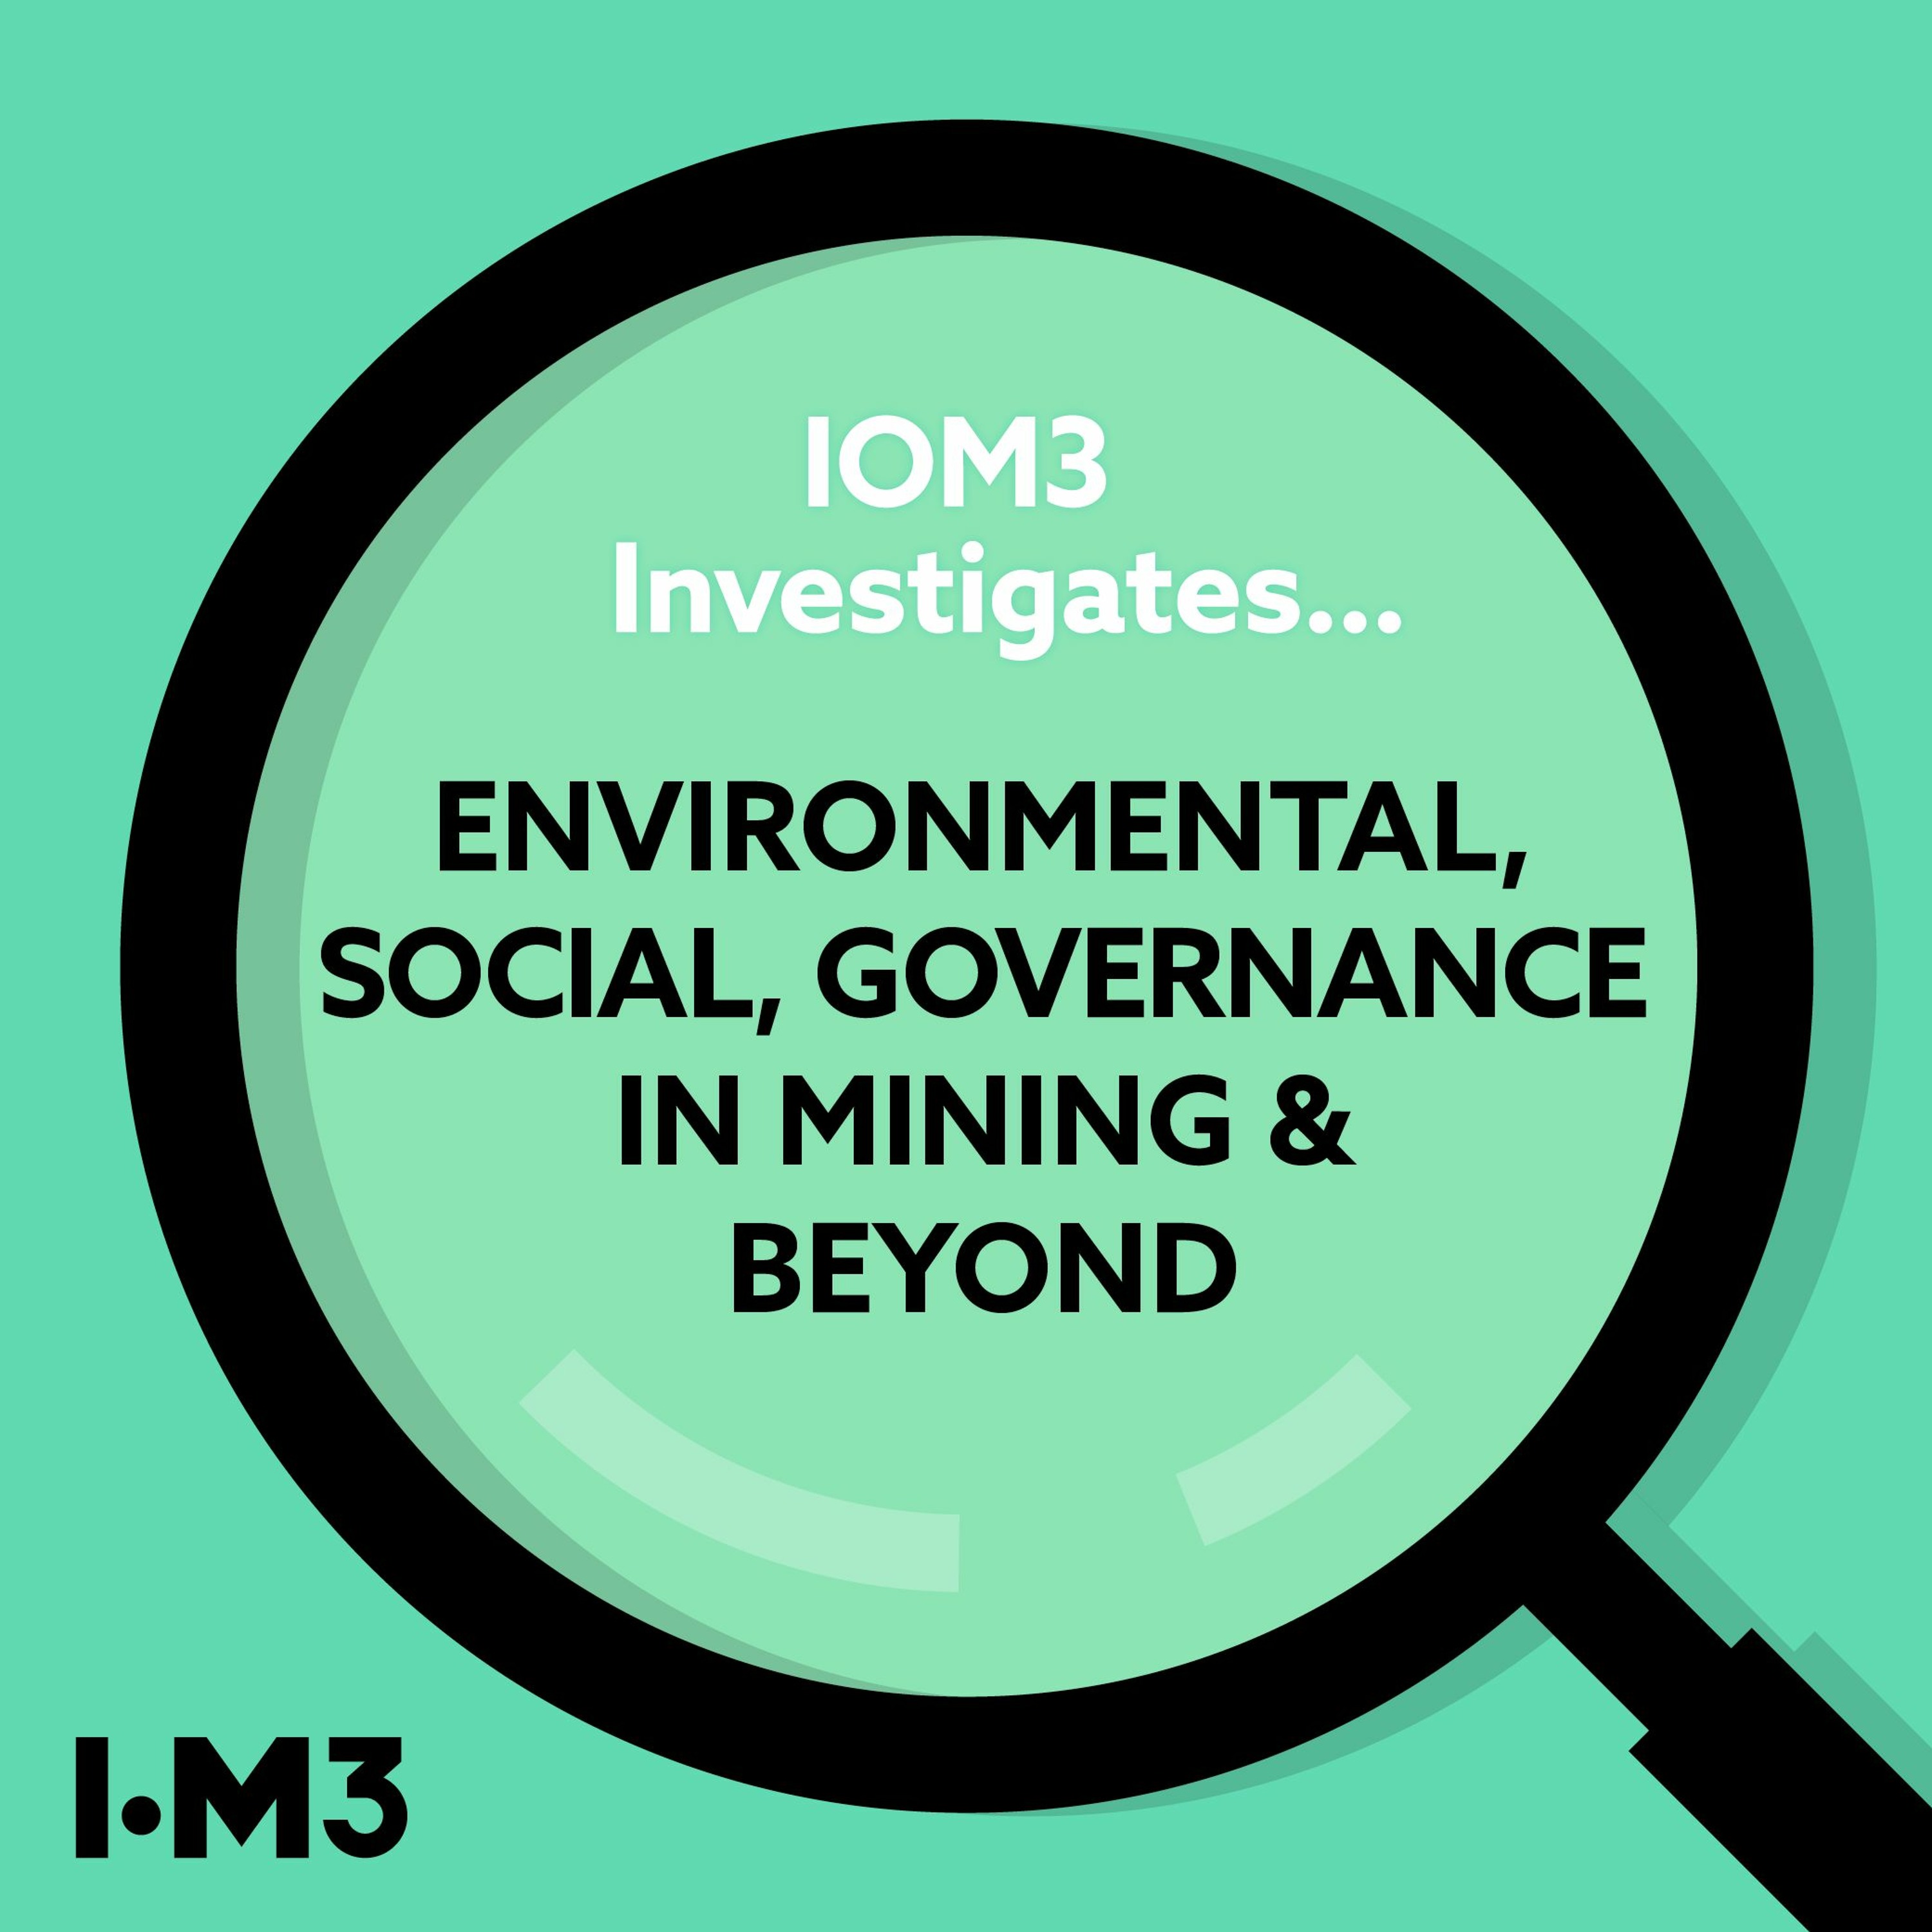 IOM3 Investigates... Environmental, social, governance in mining and beyond